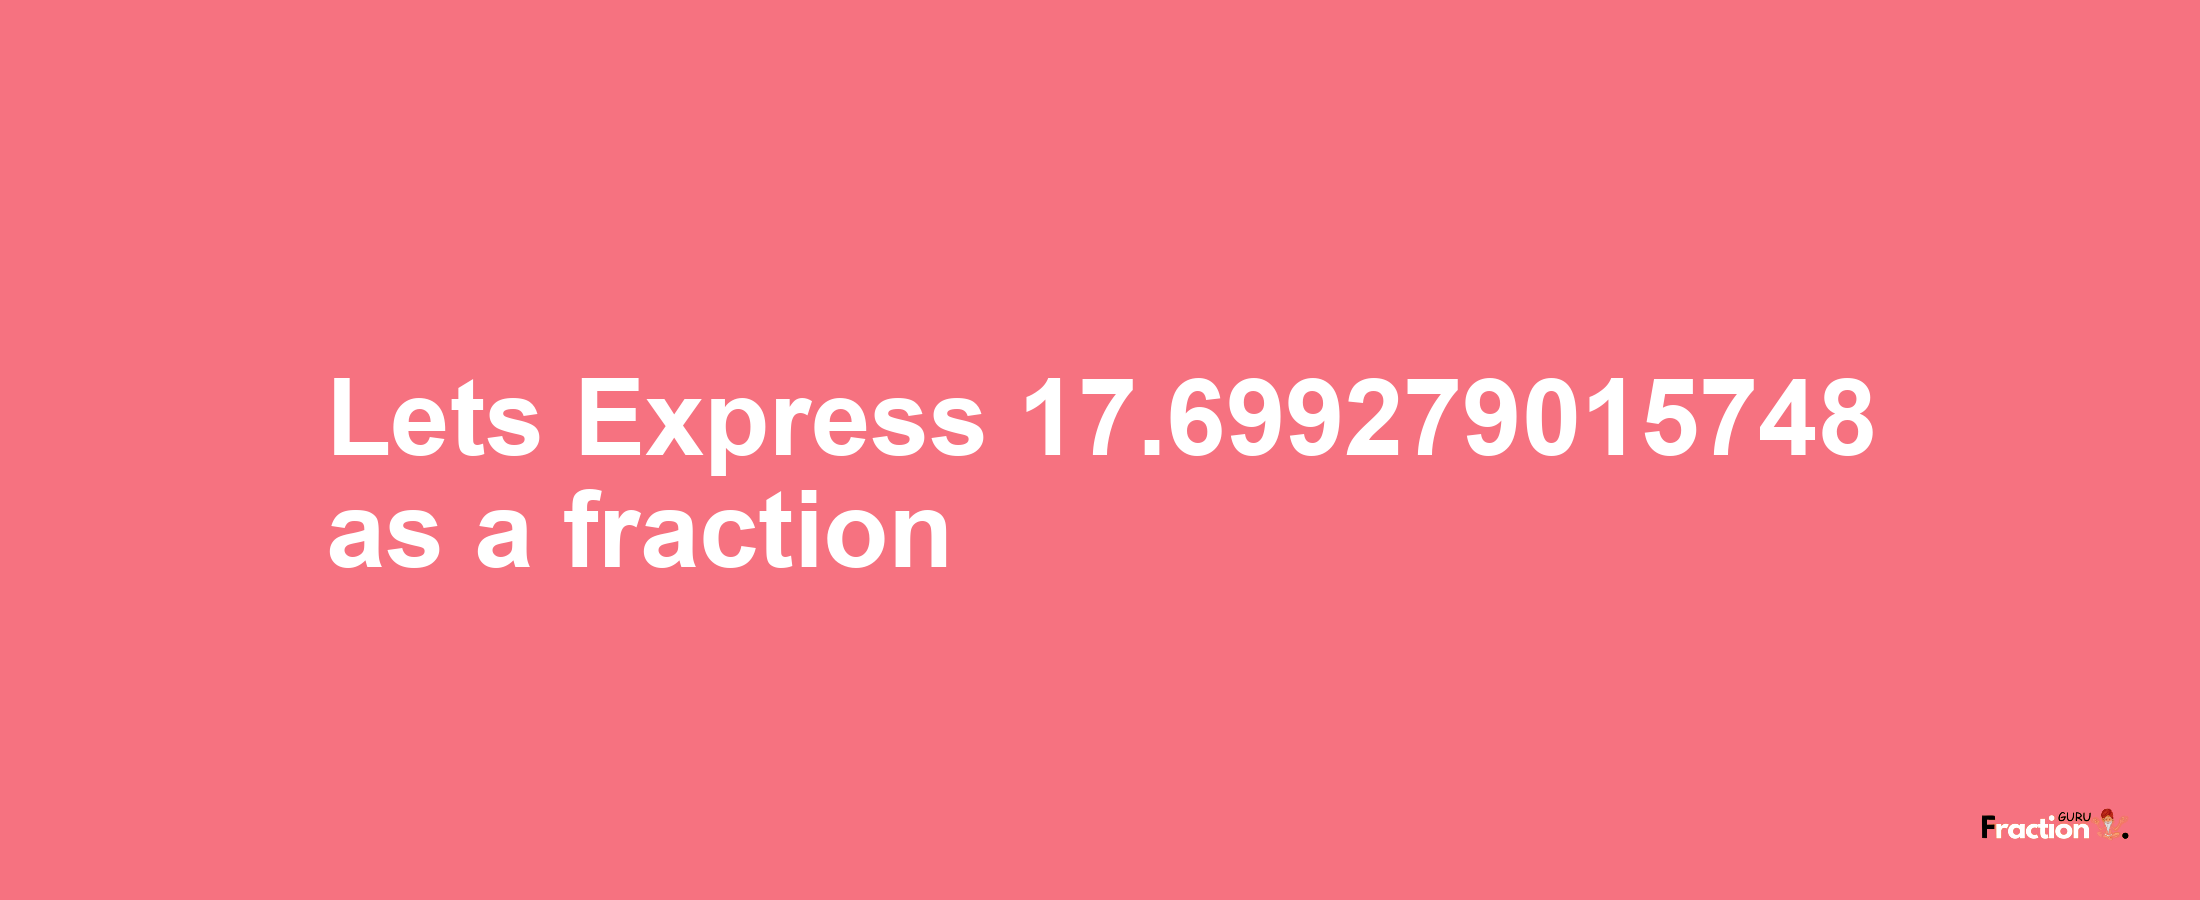 Lets Express 17.699279015748 as afraction